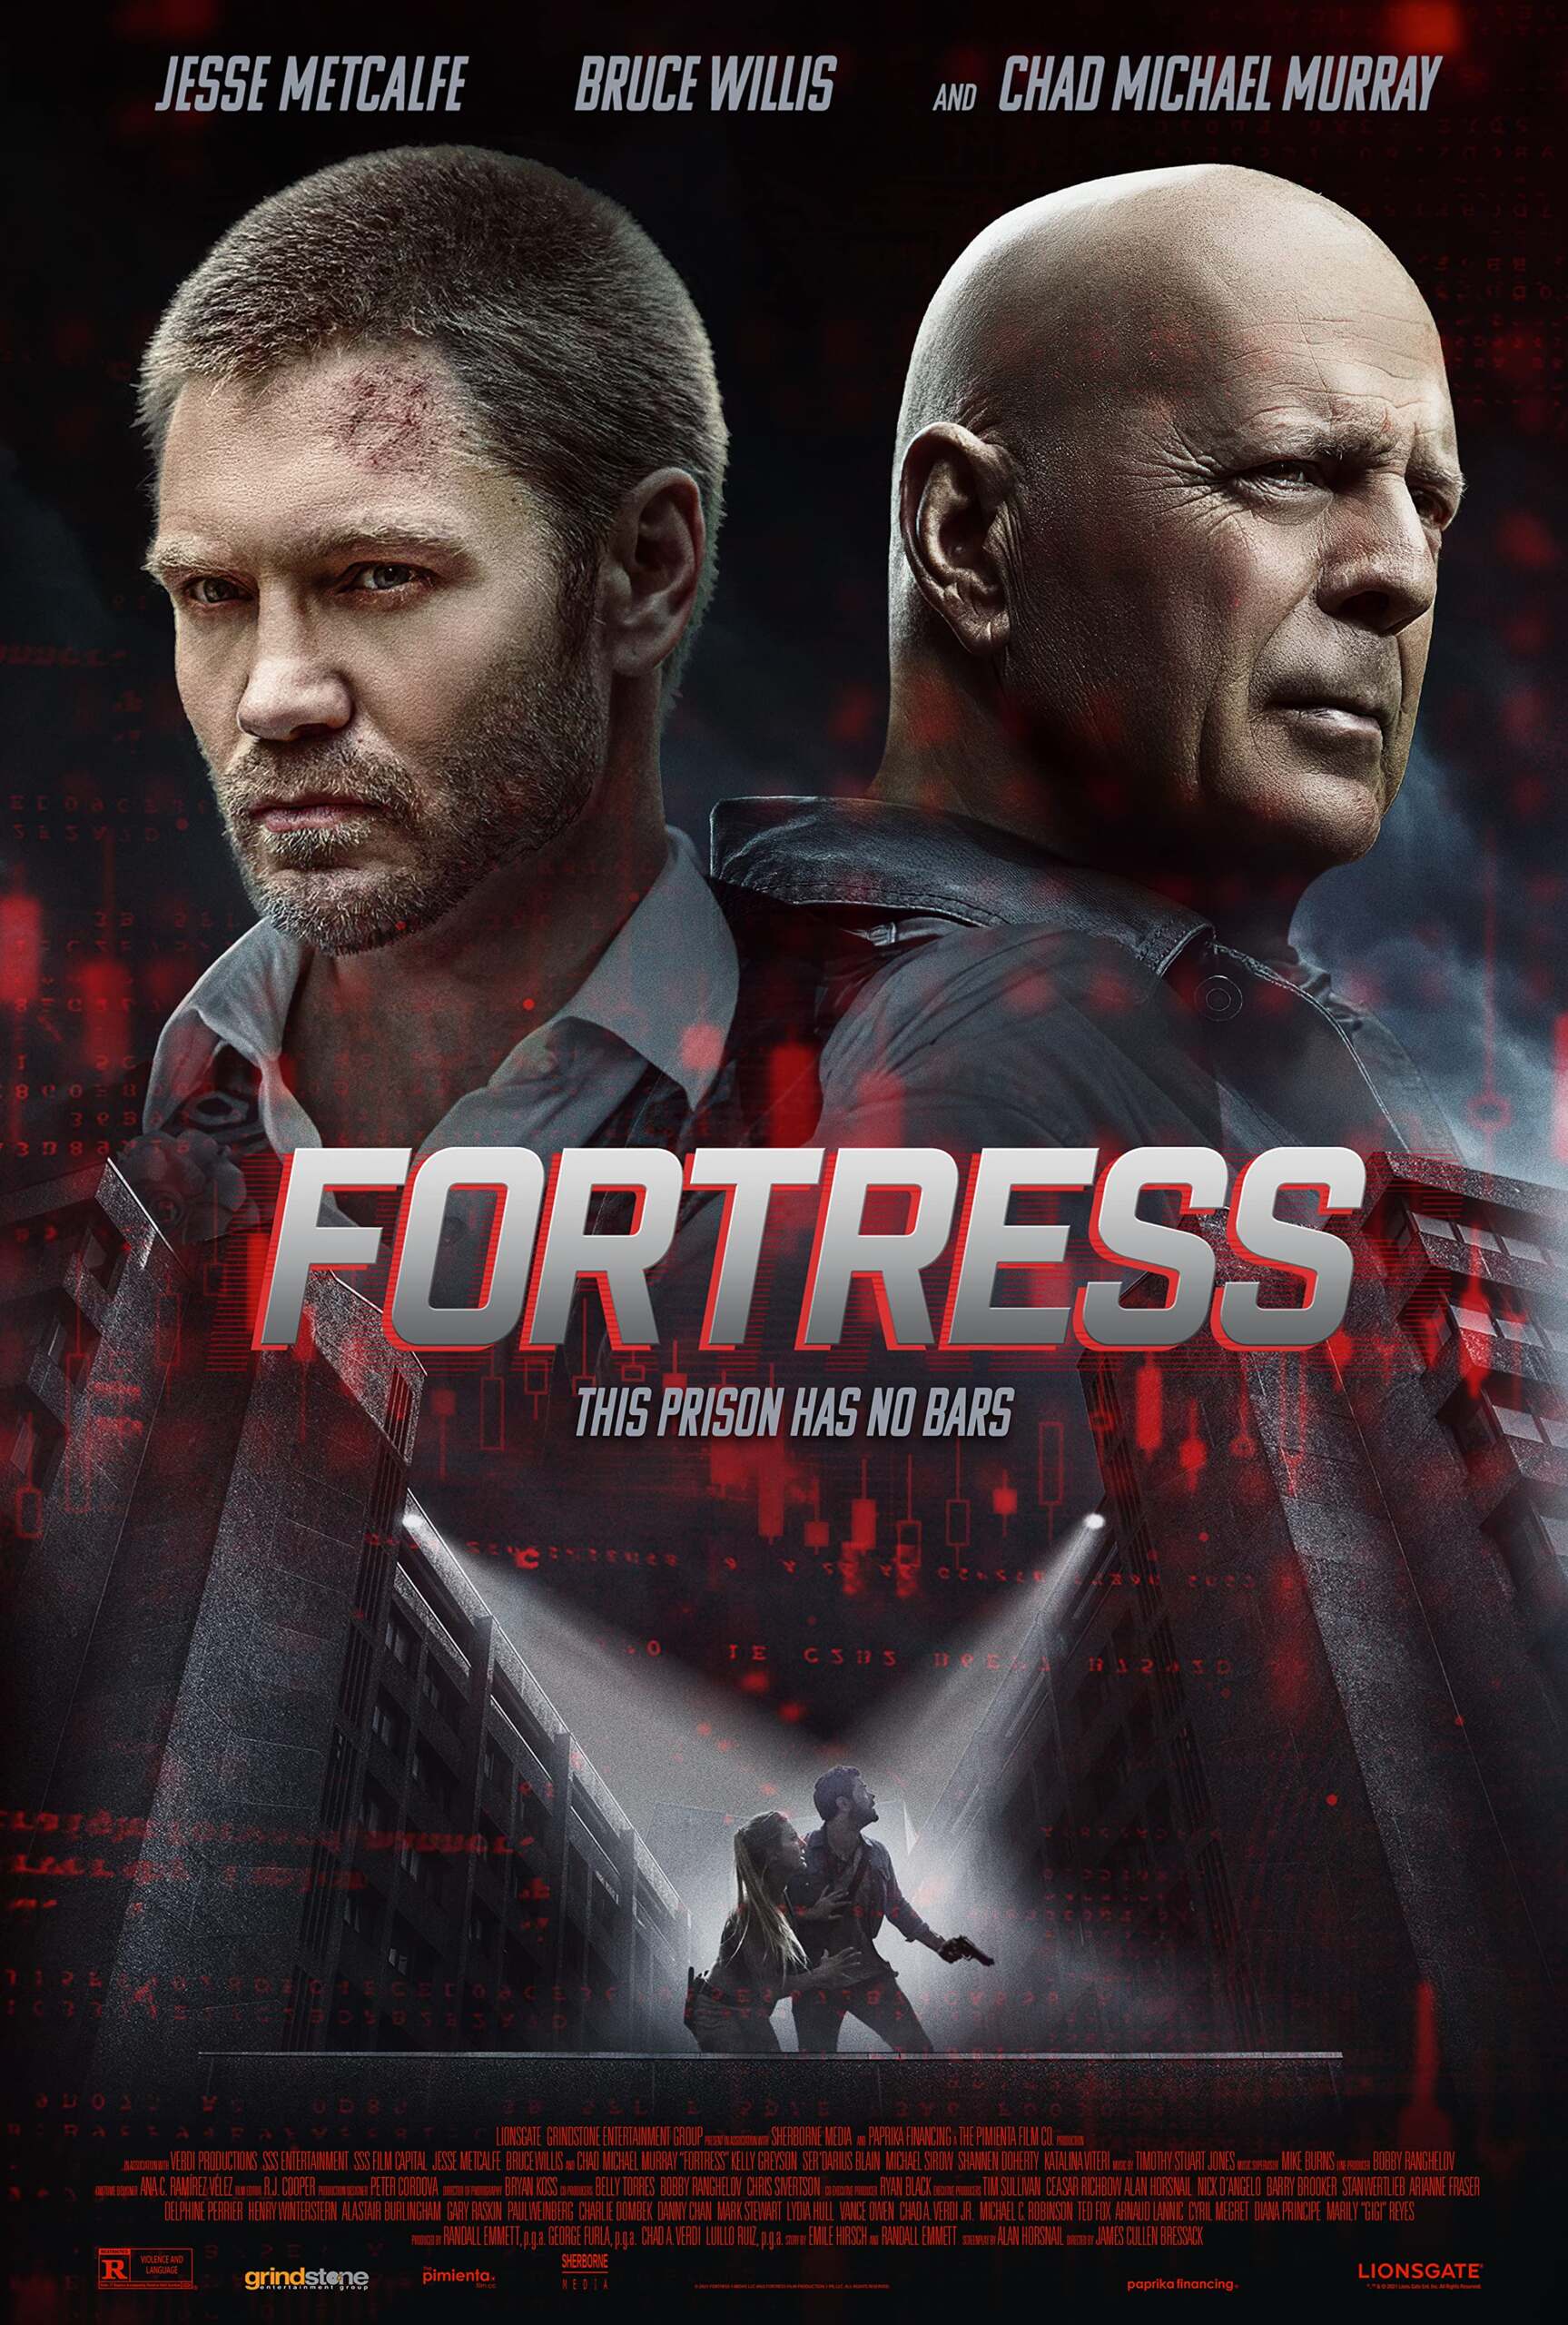 1st Trailer For 'Fortress' Movie Starring Bruce Willis